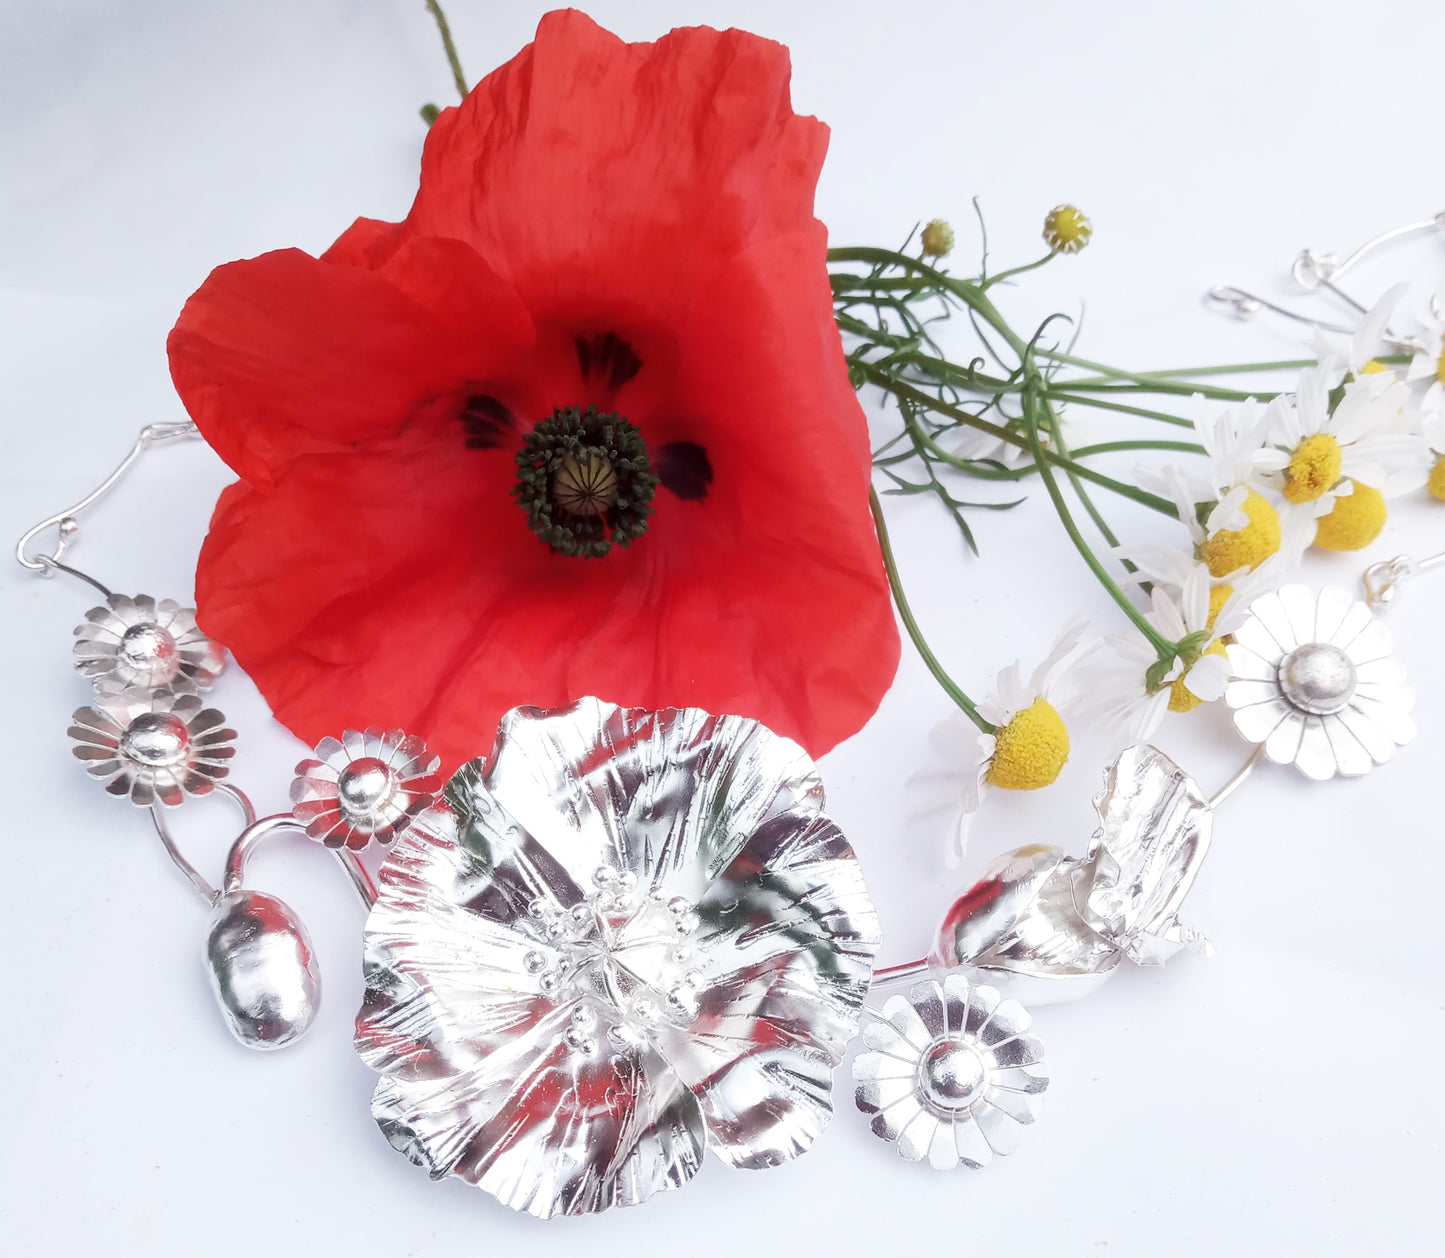 real poppy and daisies with handmade silver poppy and daisy life size necklace